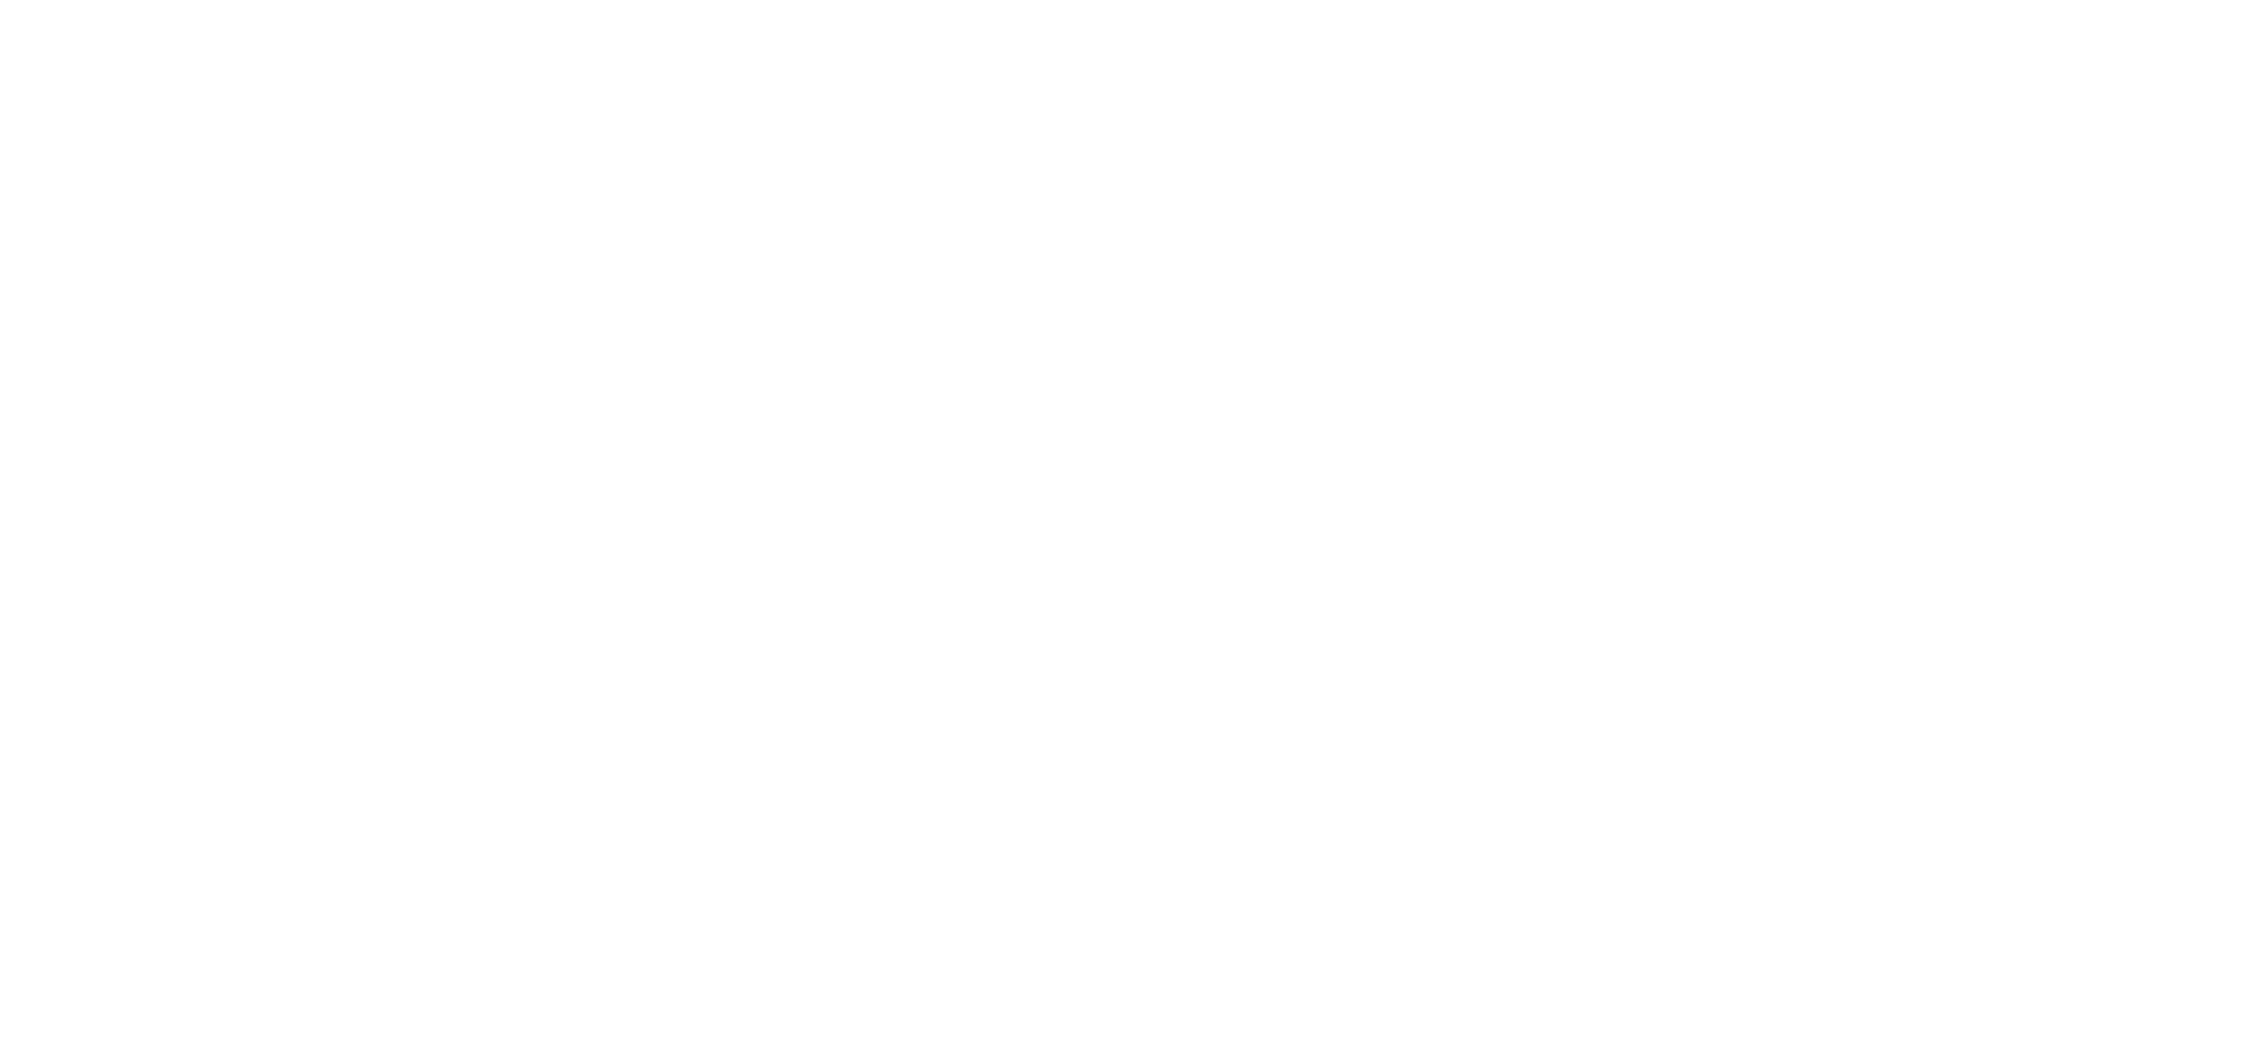 UFCW a Voice for working America